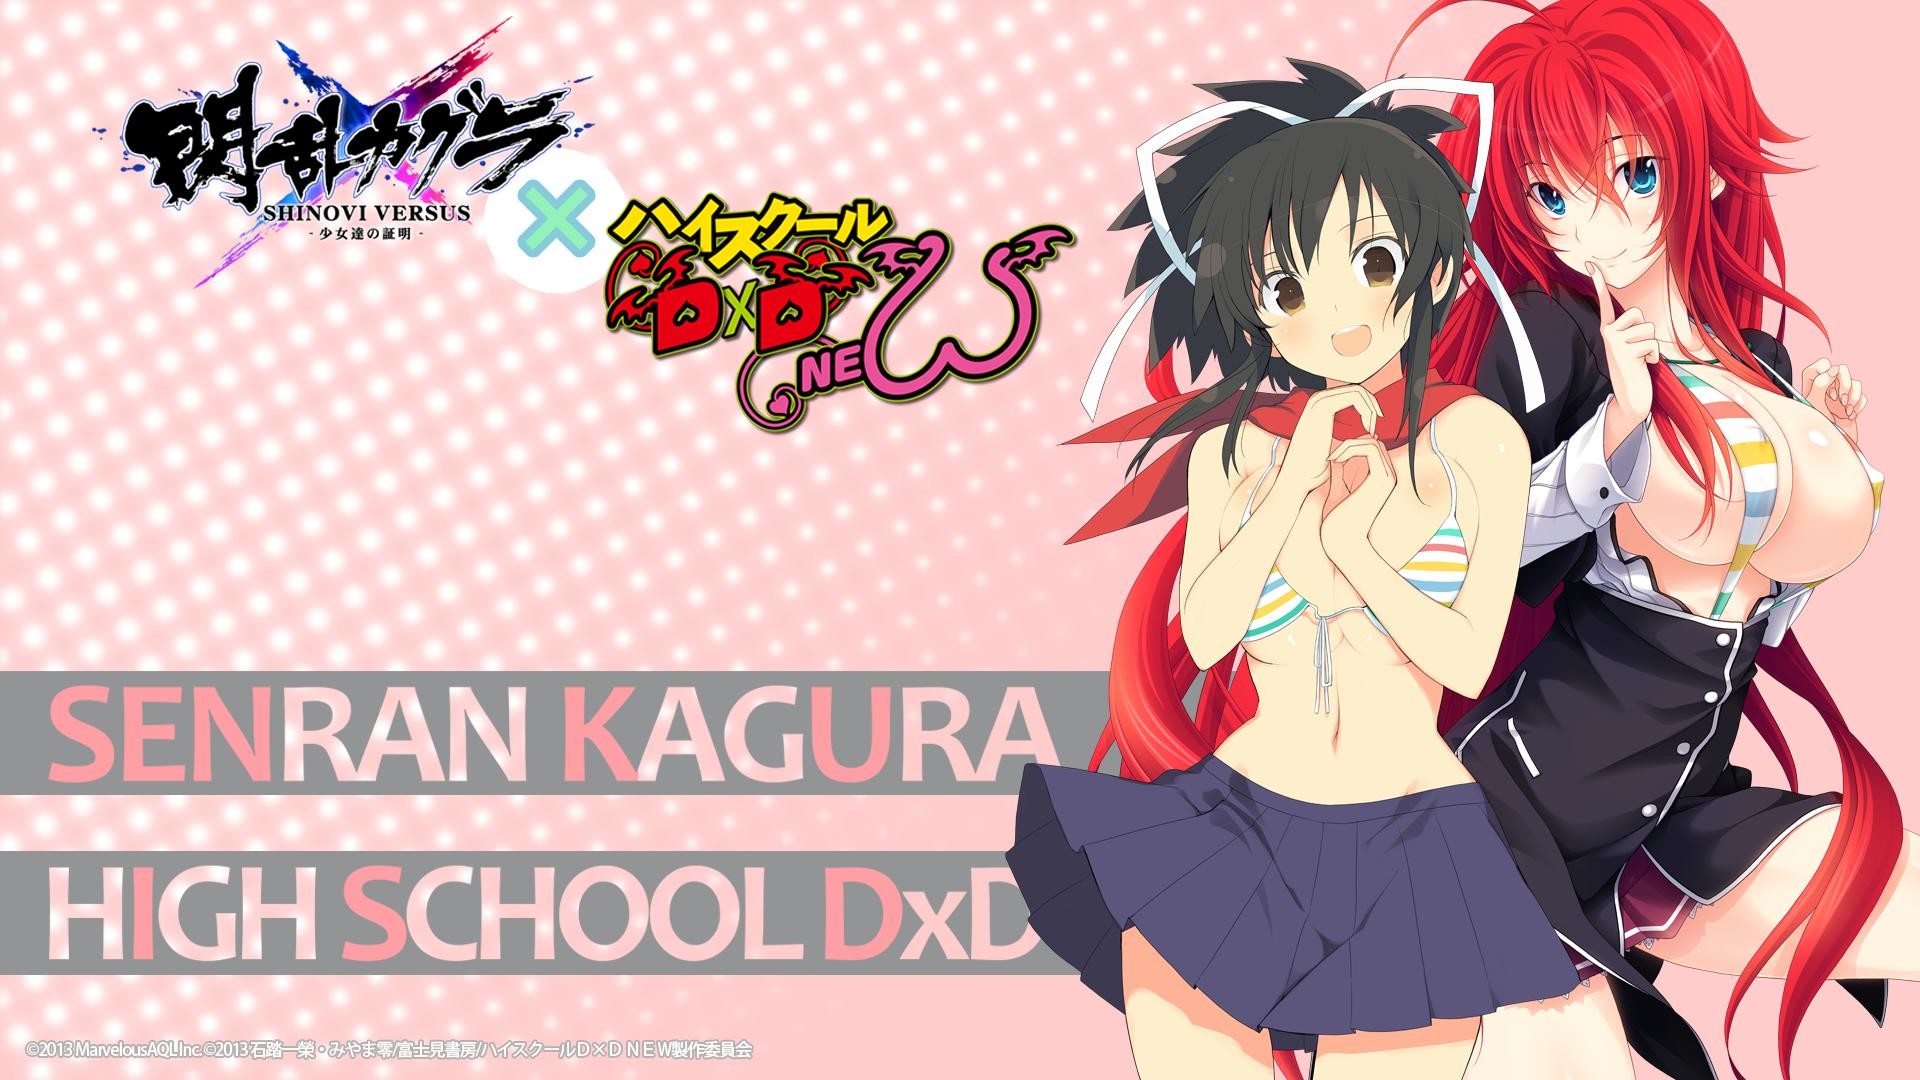 1920x1080 there's still hope - Senran Kagura Burst Message Board for 3DS - Page 15 -  GameFAQs